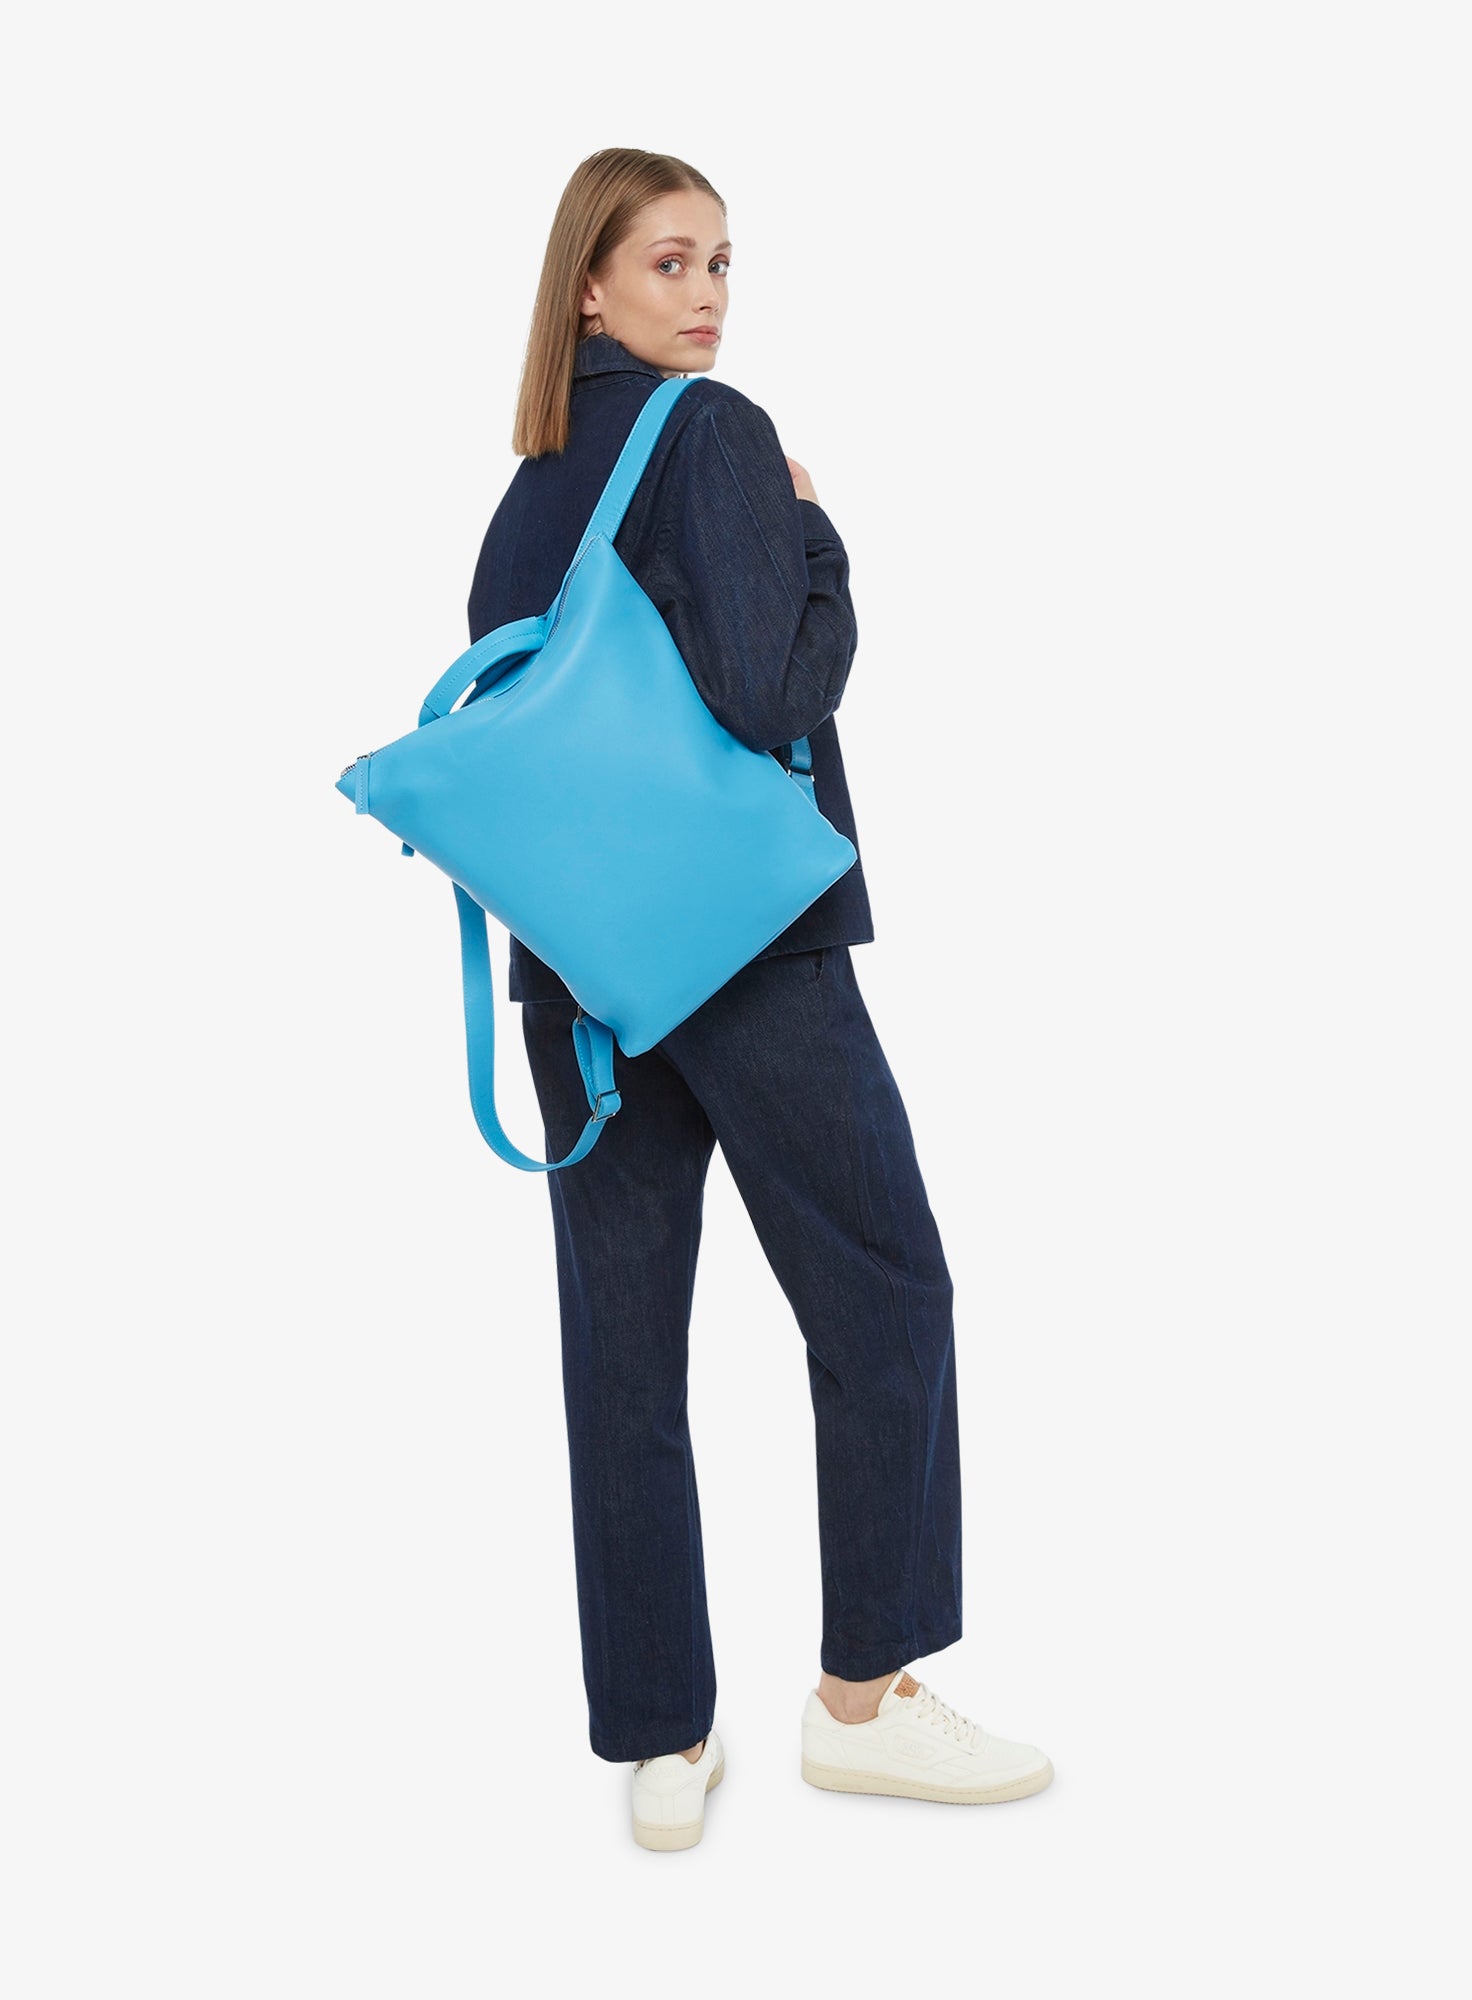 TOTE_BACKPACK_ELLIOT_NAPPA_BLUE_Designed_in_Berlin_Made_to_last_Handmade_in_Poland.